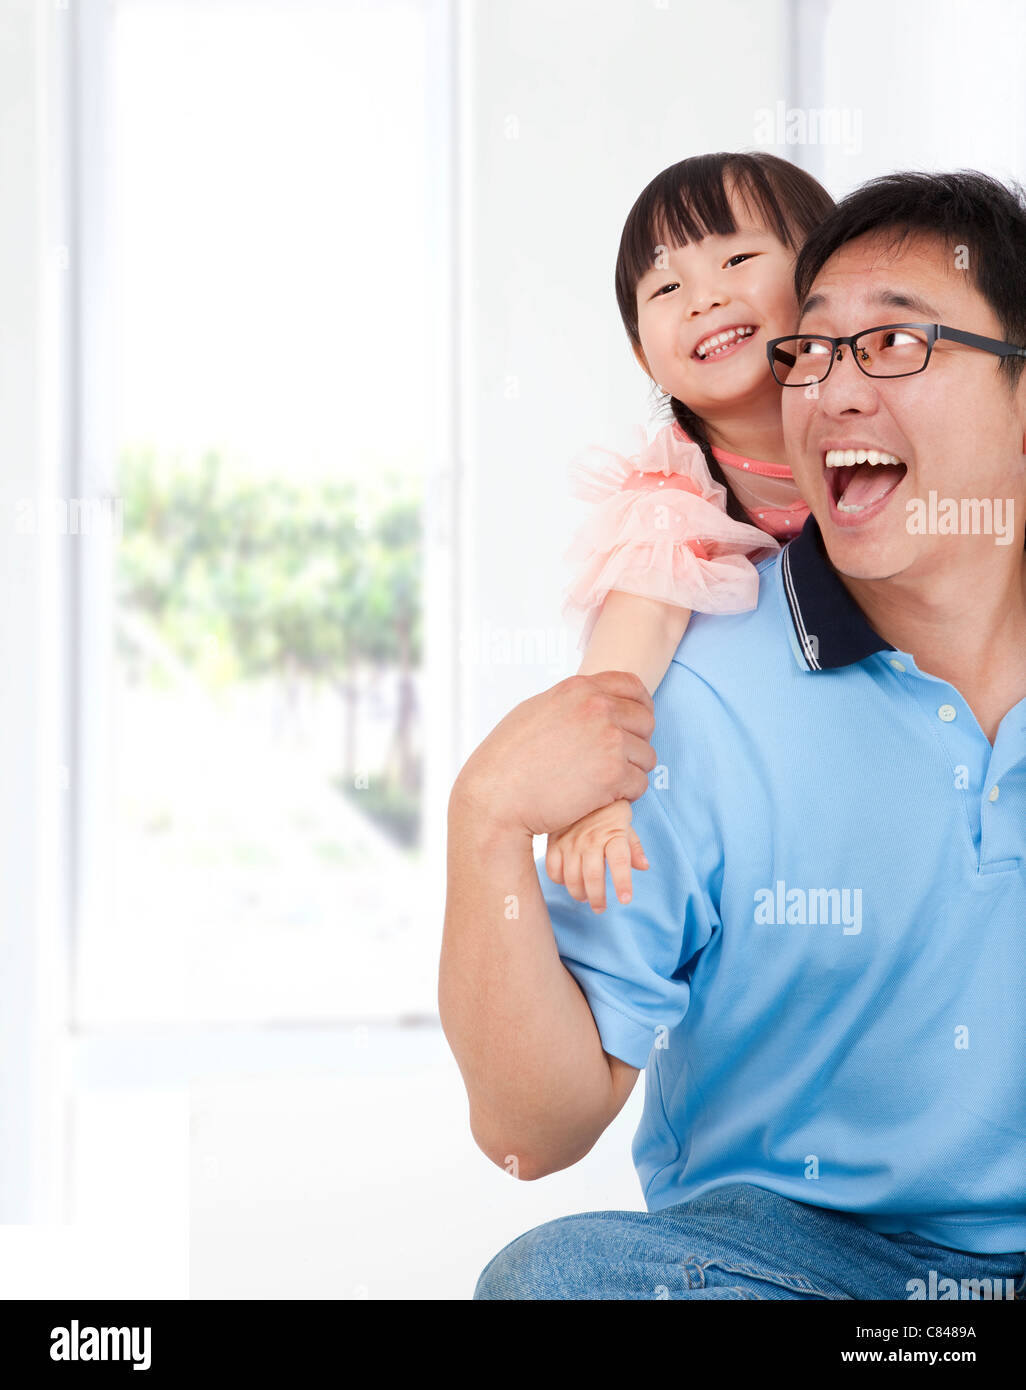 happy family lifestyle . father and little girl. Stock Photo